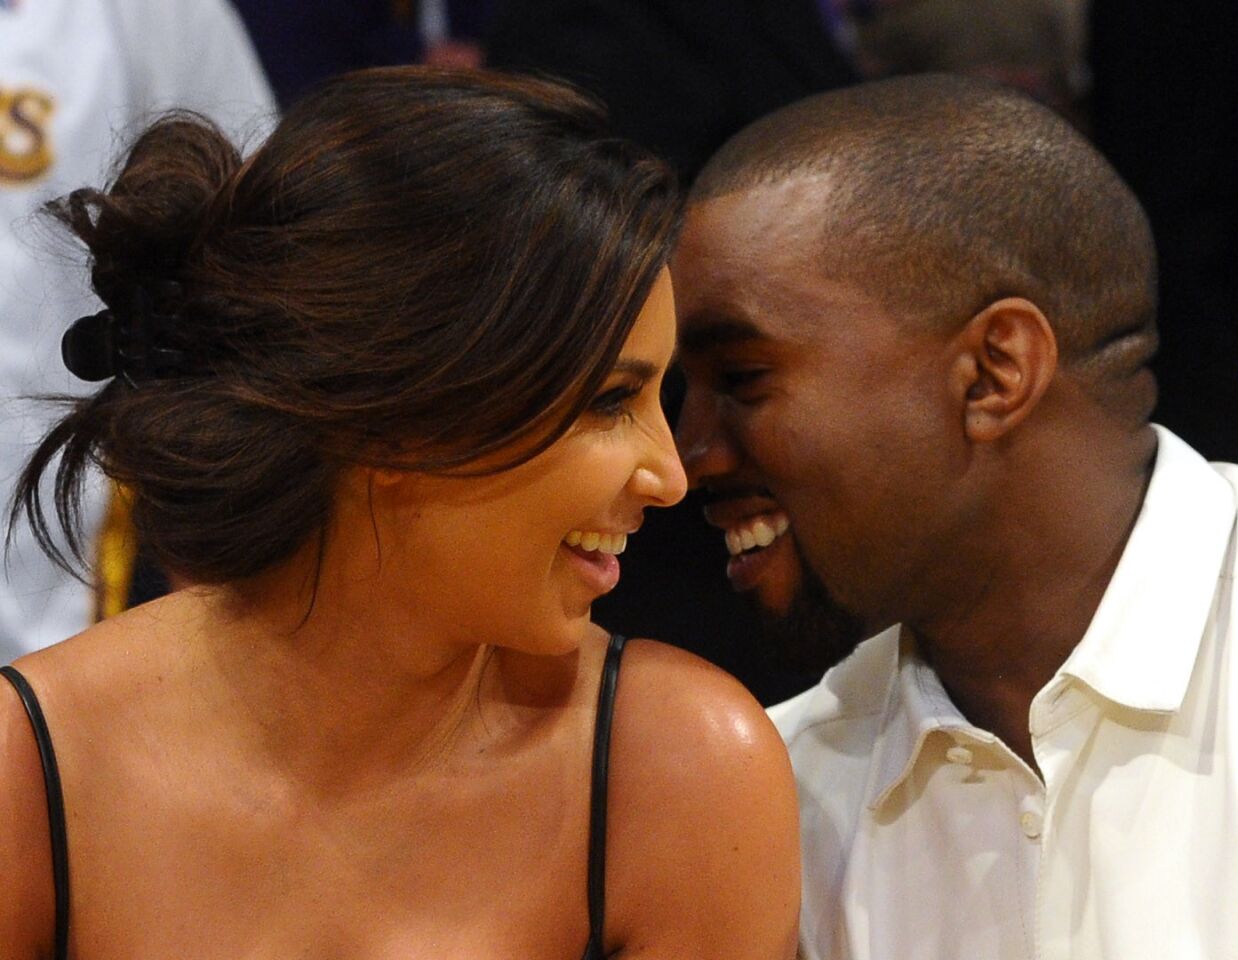 Kim Kardashian and Kanye West talk in their courtside seats before the Lakers take on the Denver Nuggets on May 12, 2012, at Staples Center in Los Angeles.